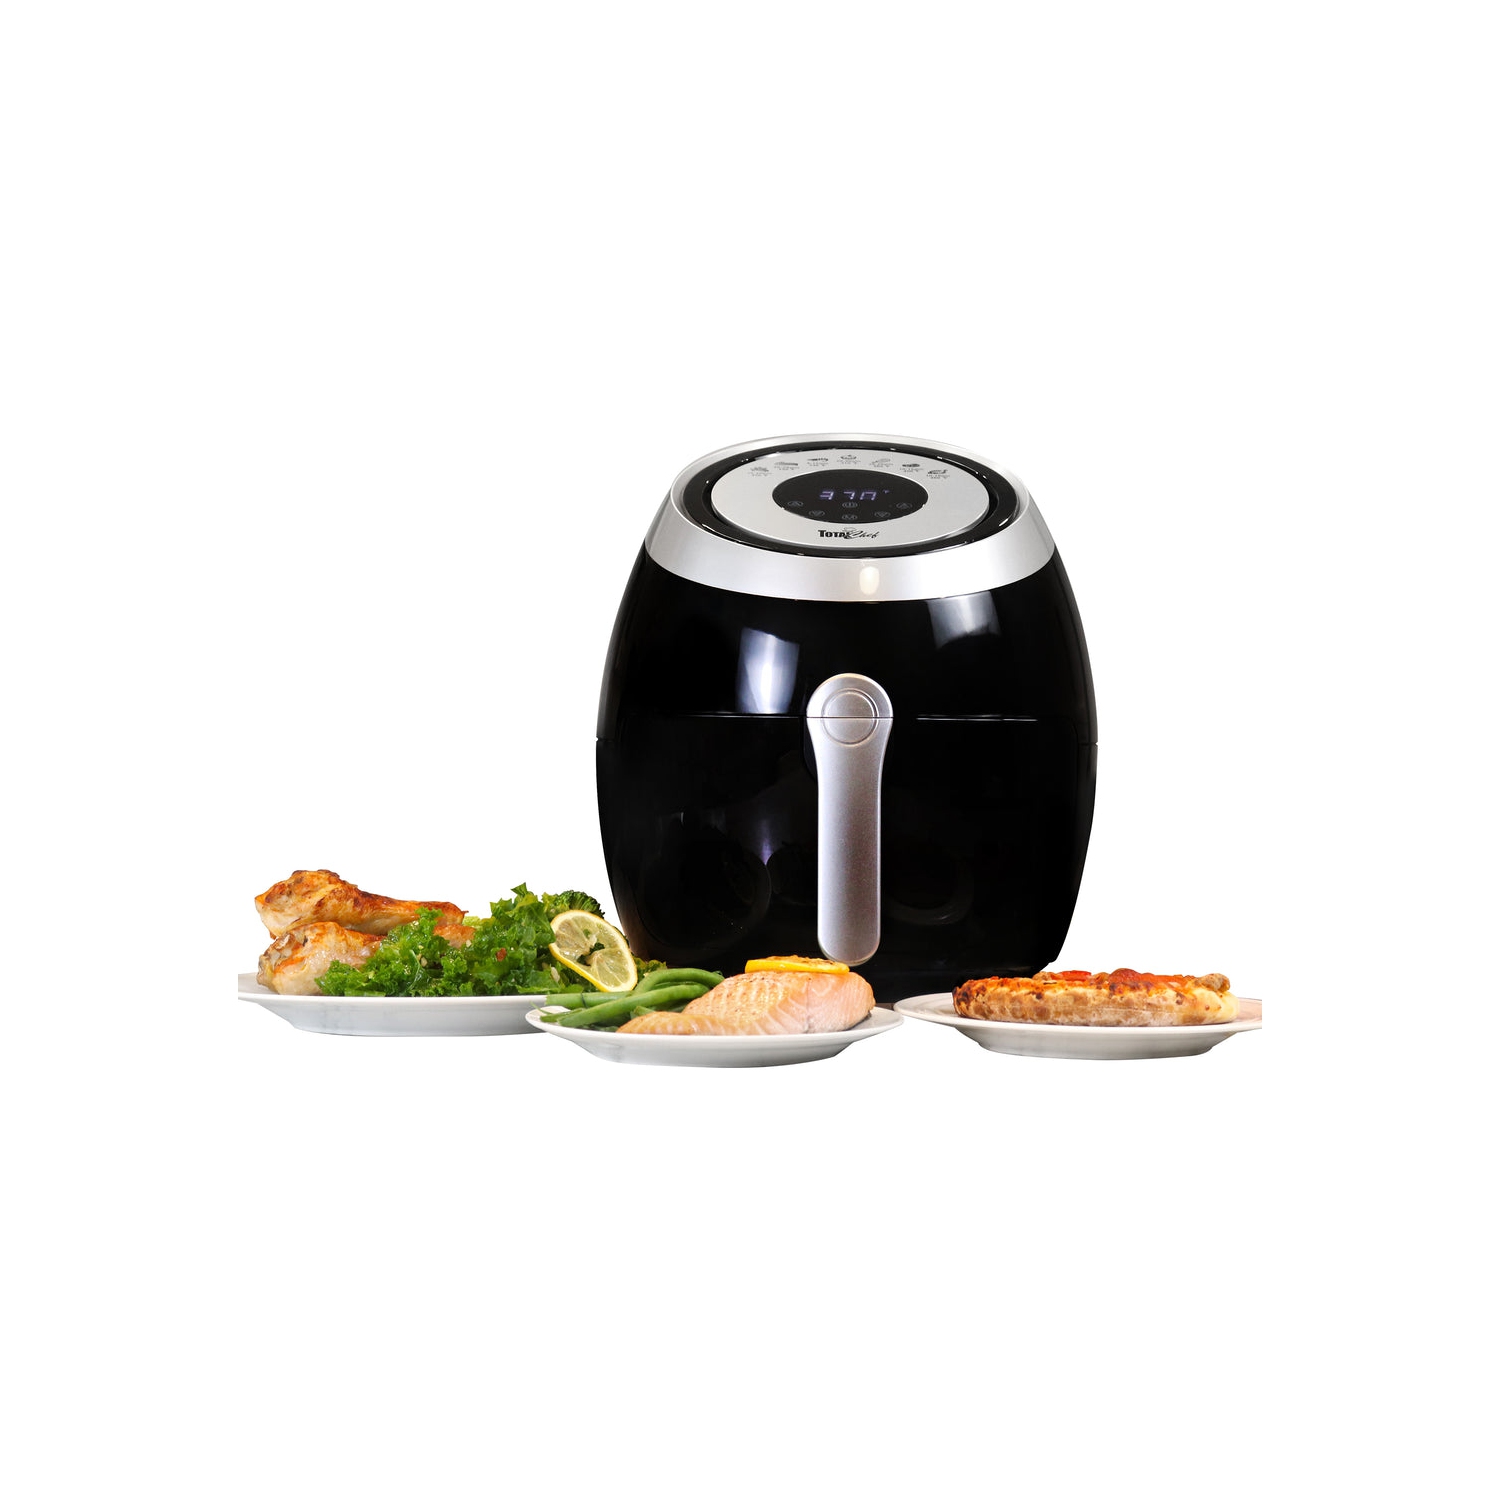 Total Chef Electric Air Fryer Oven 3.8QT/3.6L, Digital Touchscreen Controls, 7 Smart Cooking Presets, Adjustable Temperature and Timer, Non-Stick Basket, Quick and Easy Meals